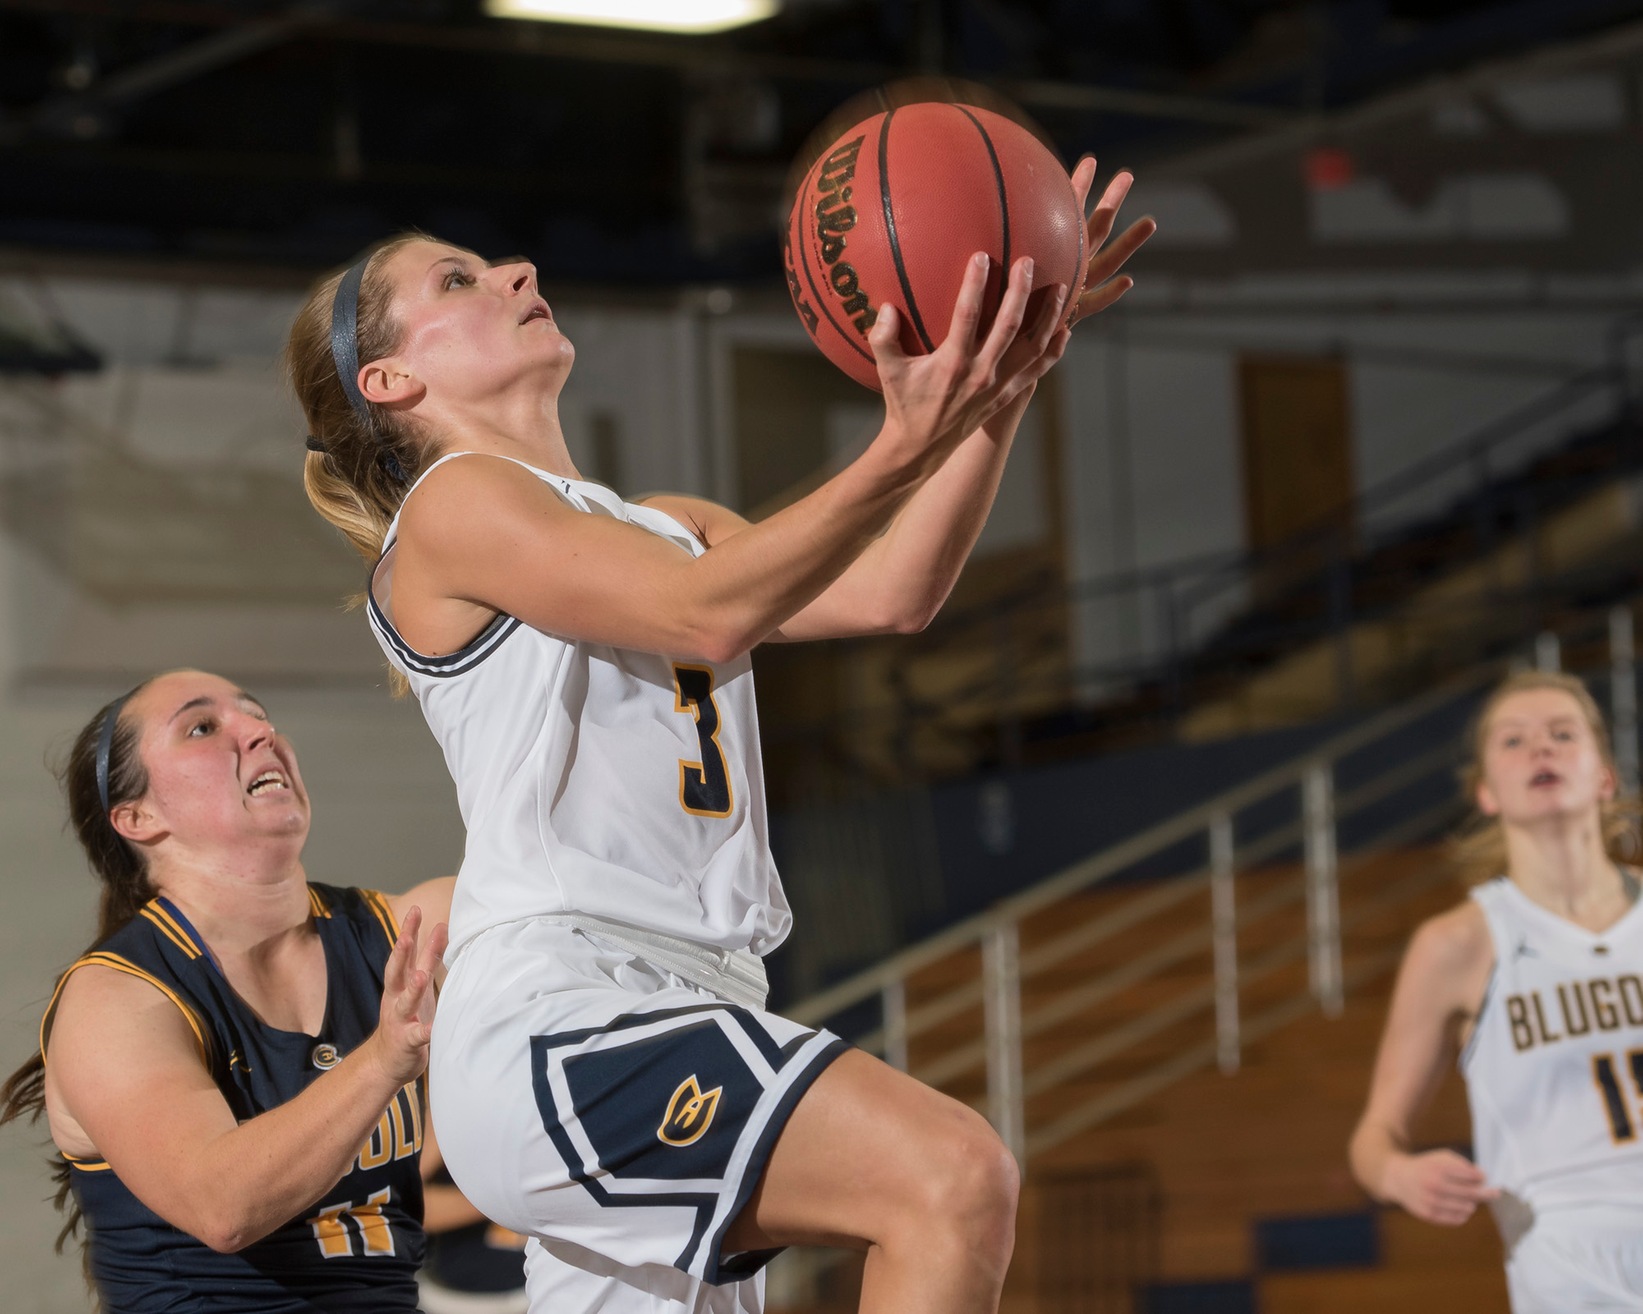 Bakken’s 15 and Dunathan’s near triple-double give Blugolds win in Texas